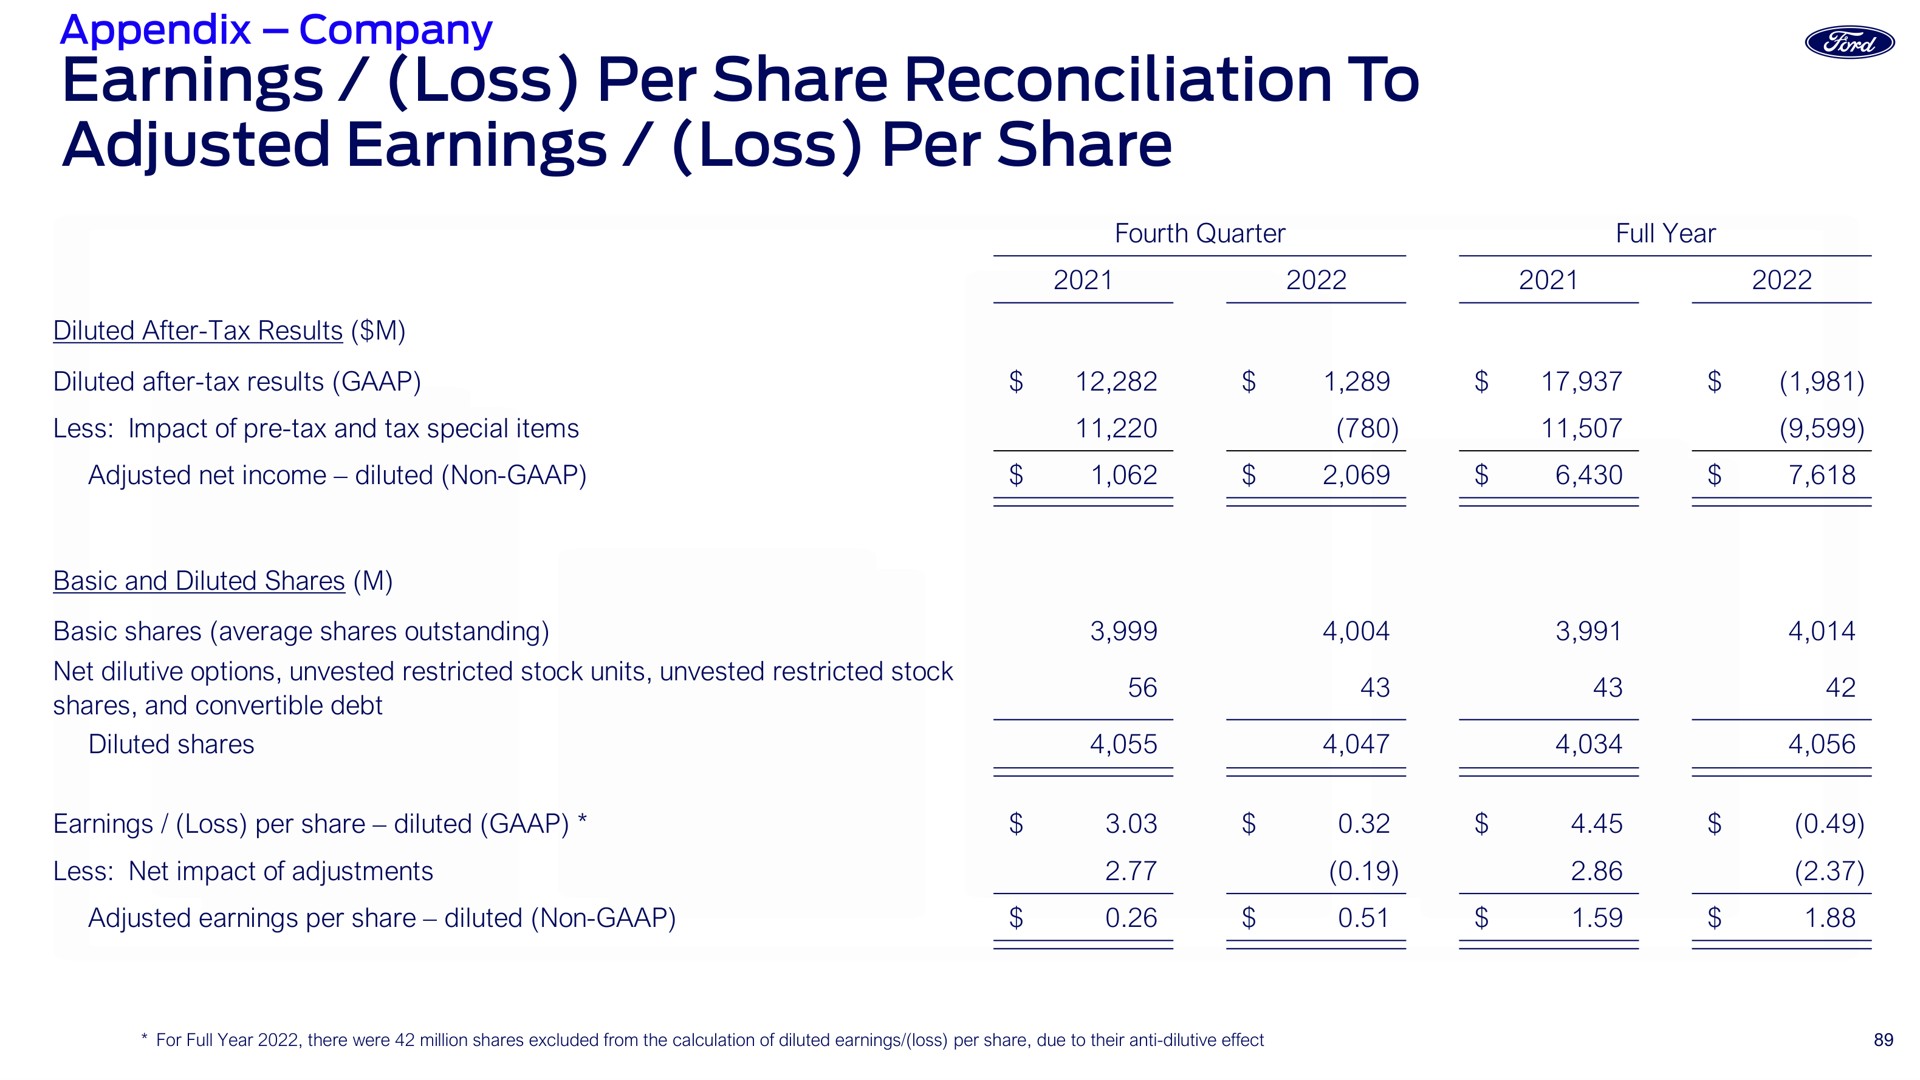 earnings loss per share reconciliation to adjusted earnings loss per share | Ford Credit